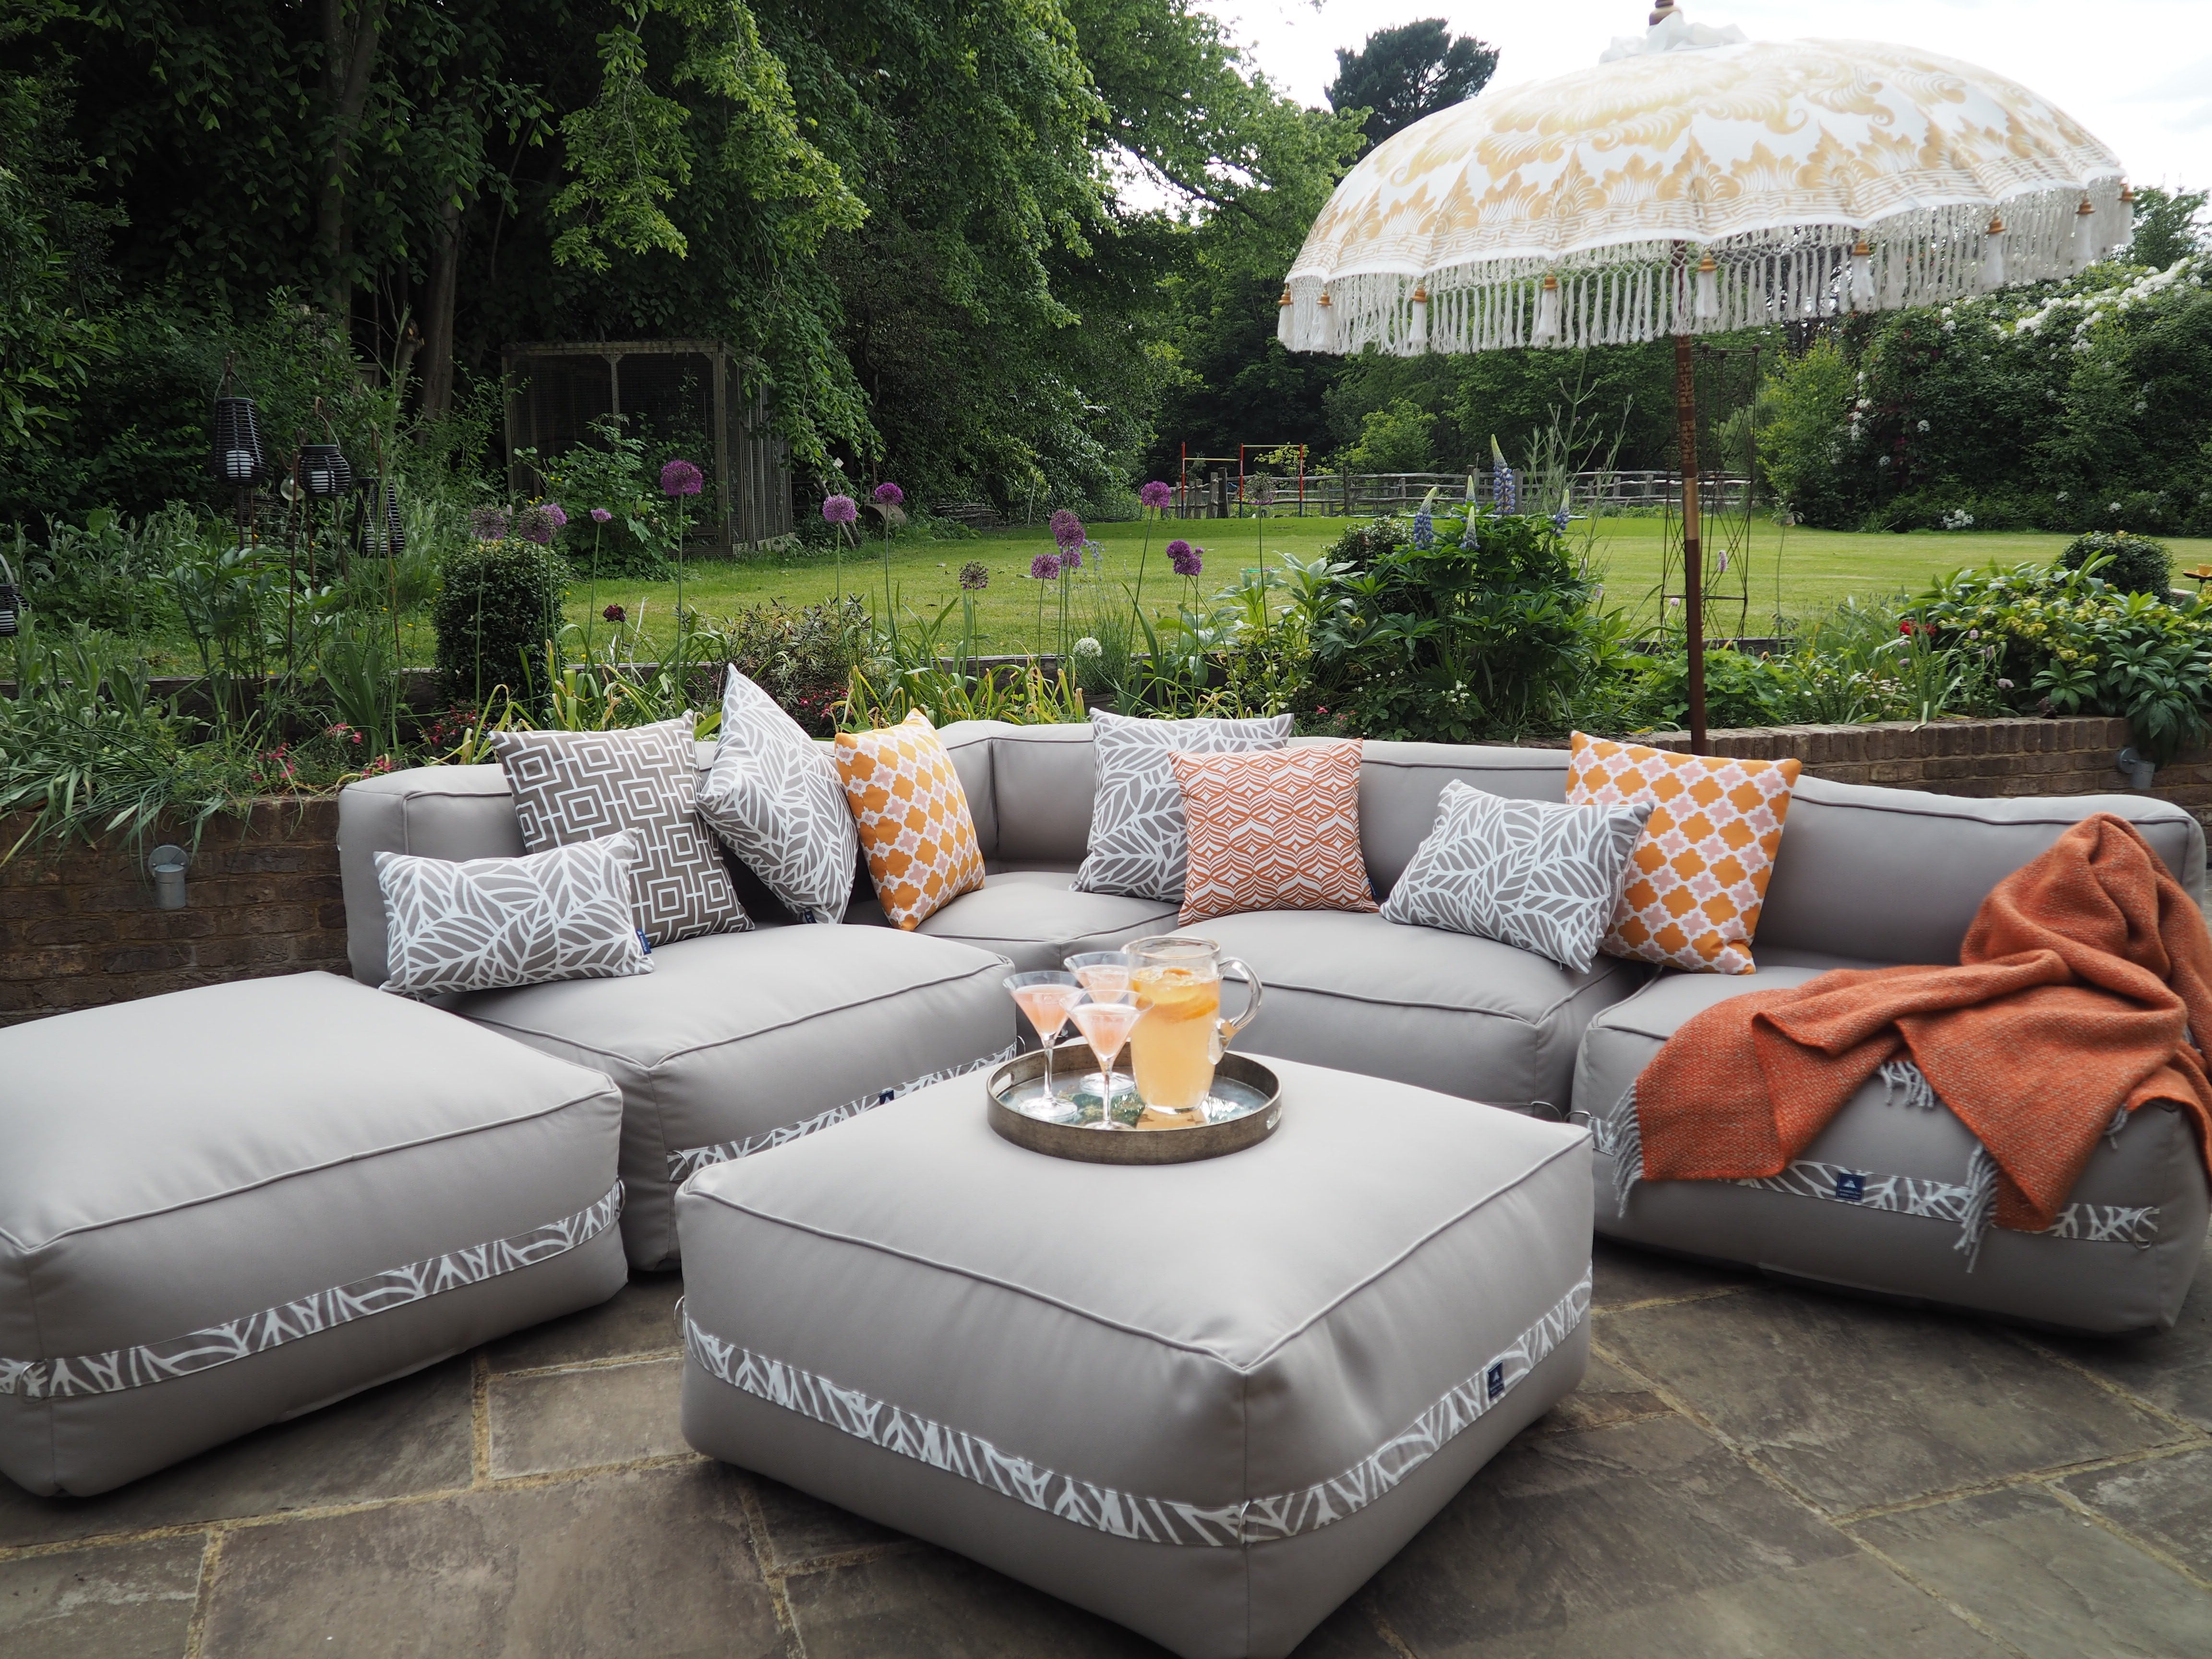 A garden sofa ready for guests outdoors on the patio